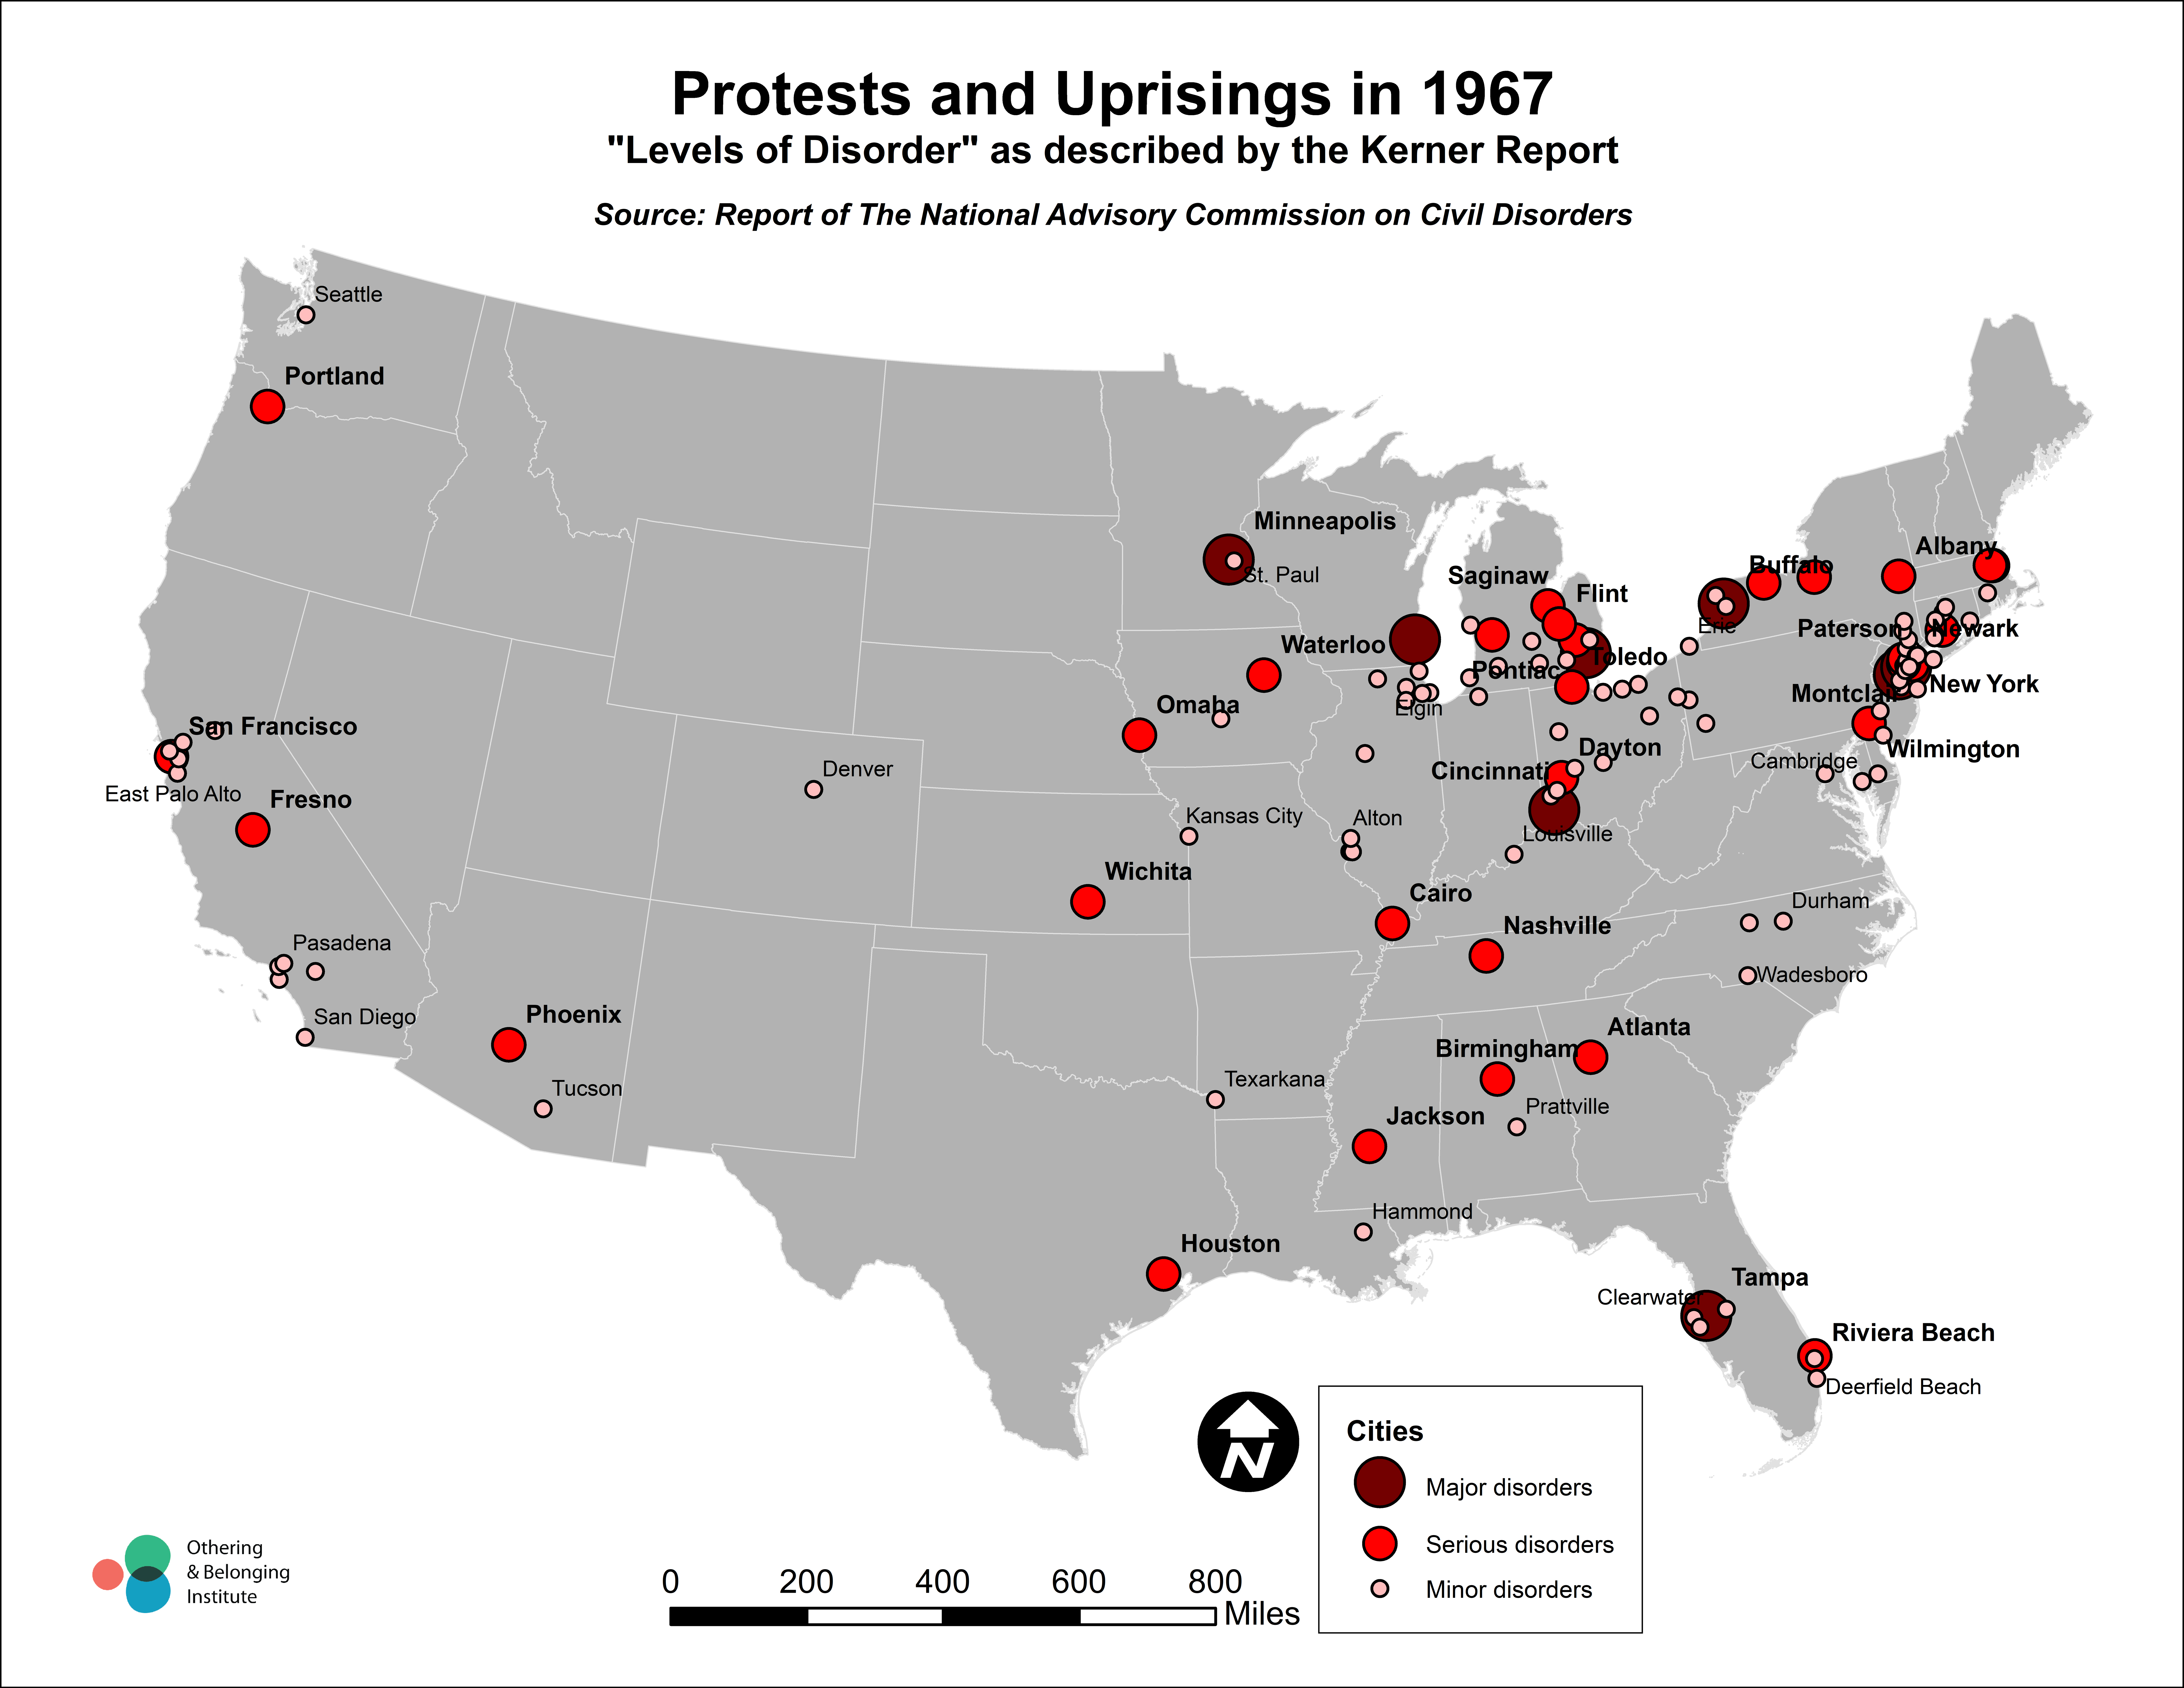 cities that witnessed protests in 1967